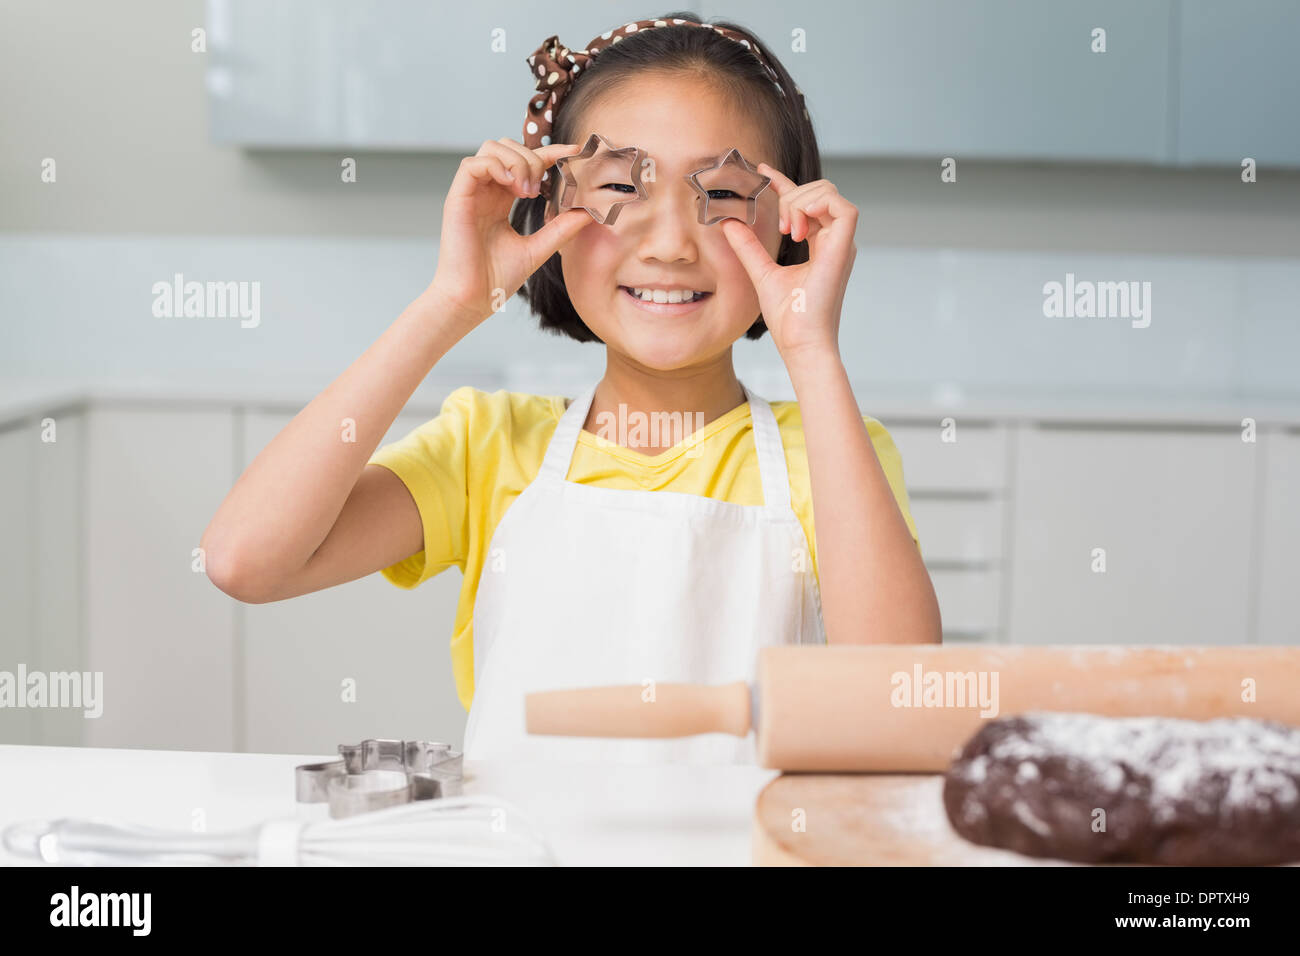 Smiling young girl holding cookie molds in kitchen Stock Photo